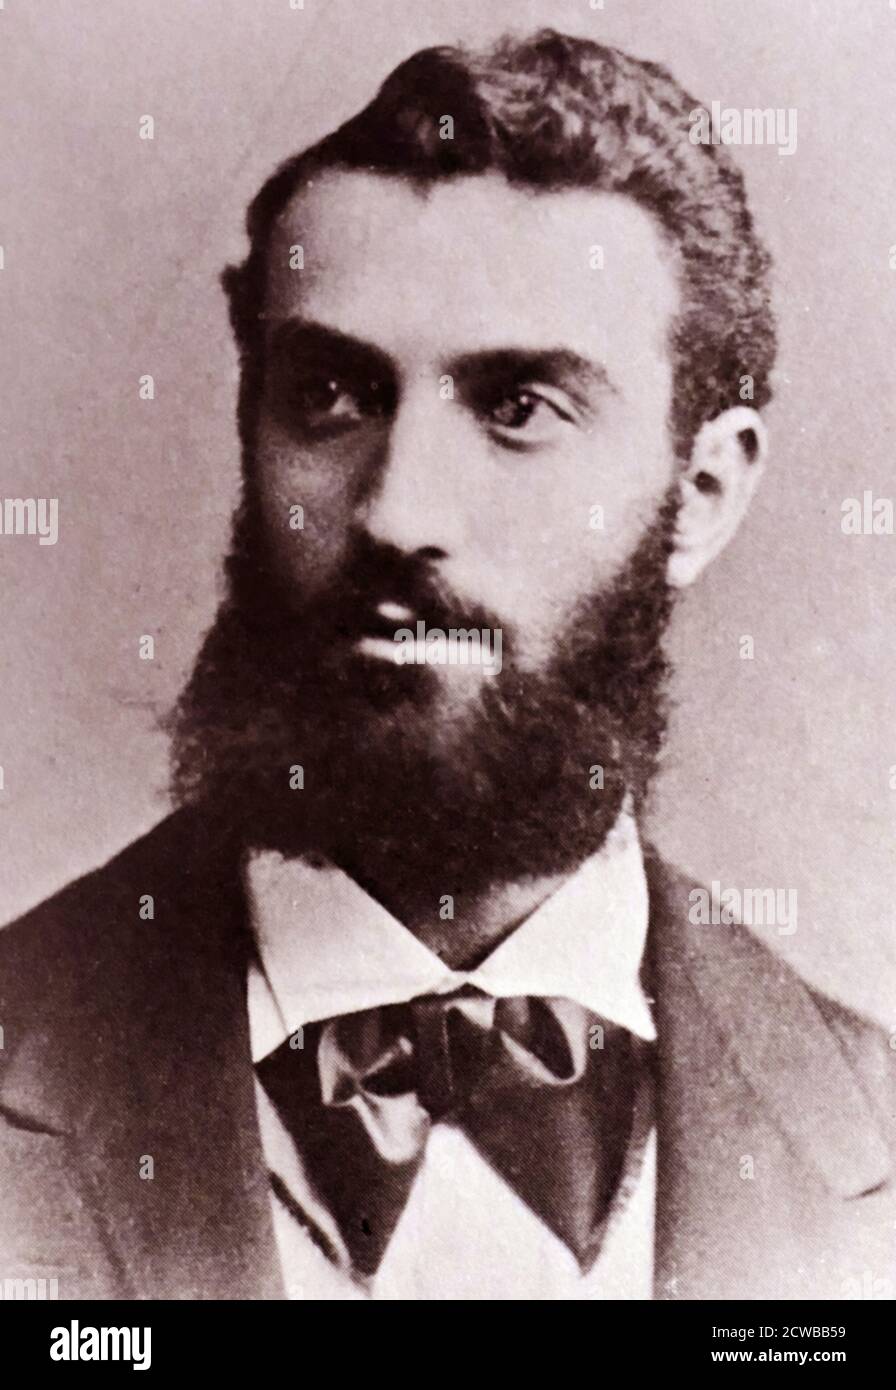 Leopold Konigstein (1850-1924), an ophthalmologist who advocated using a cocaine solution to relieve pain Stock Photo